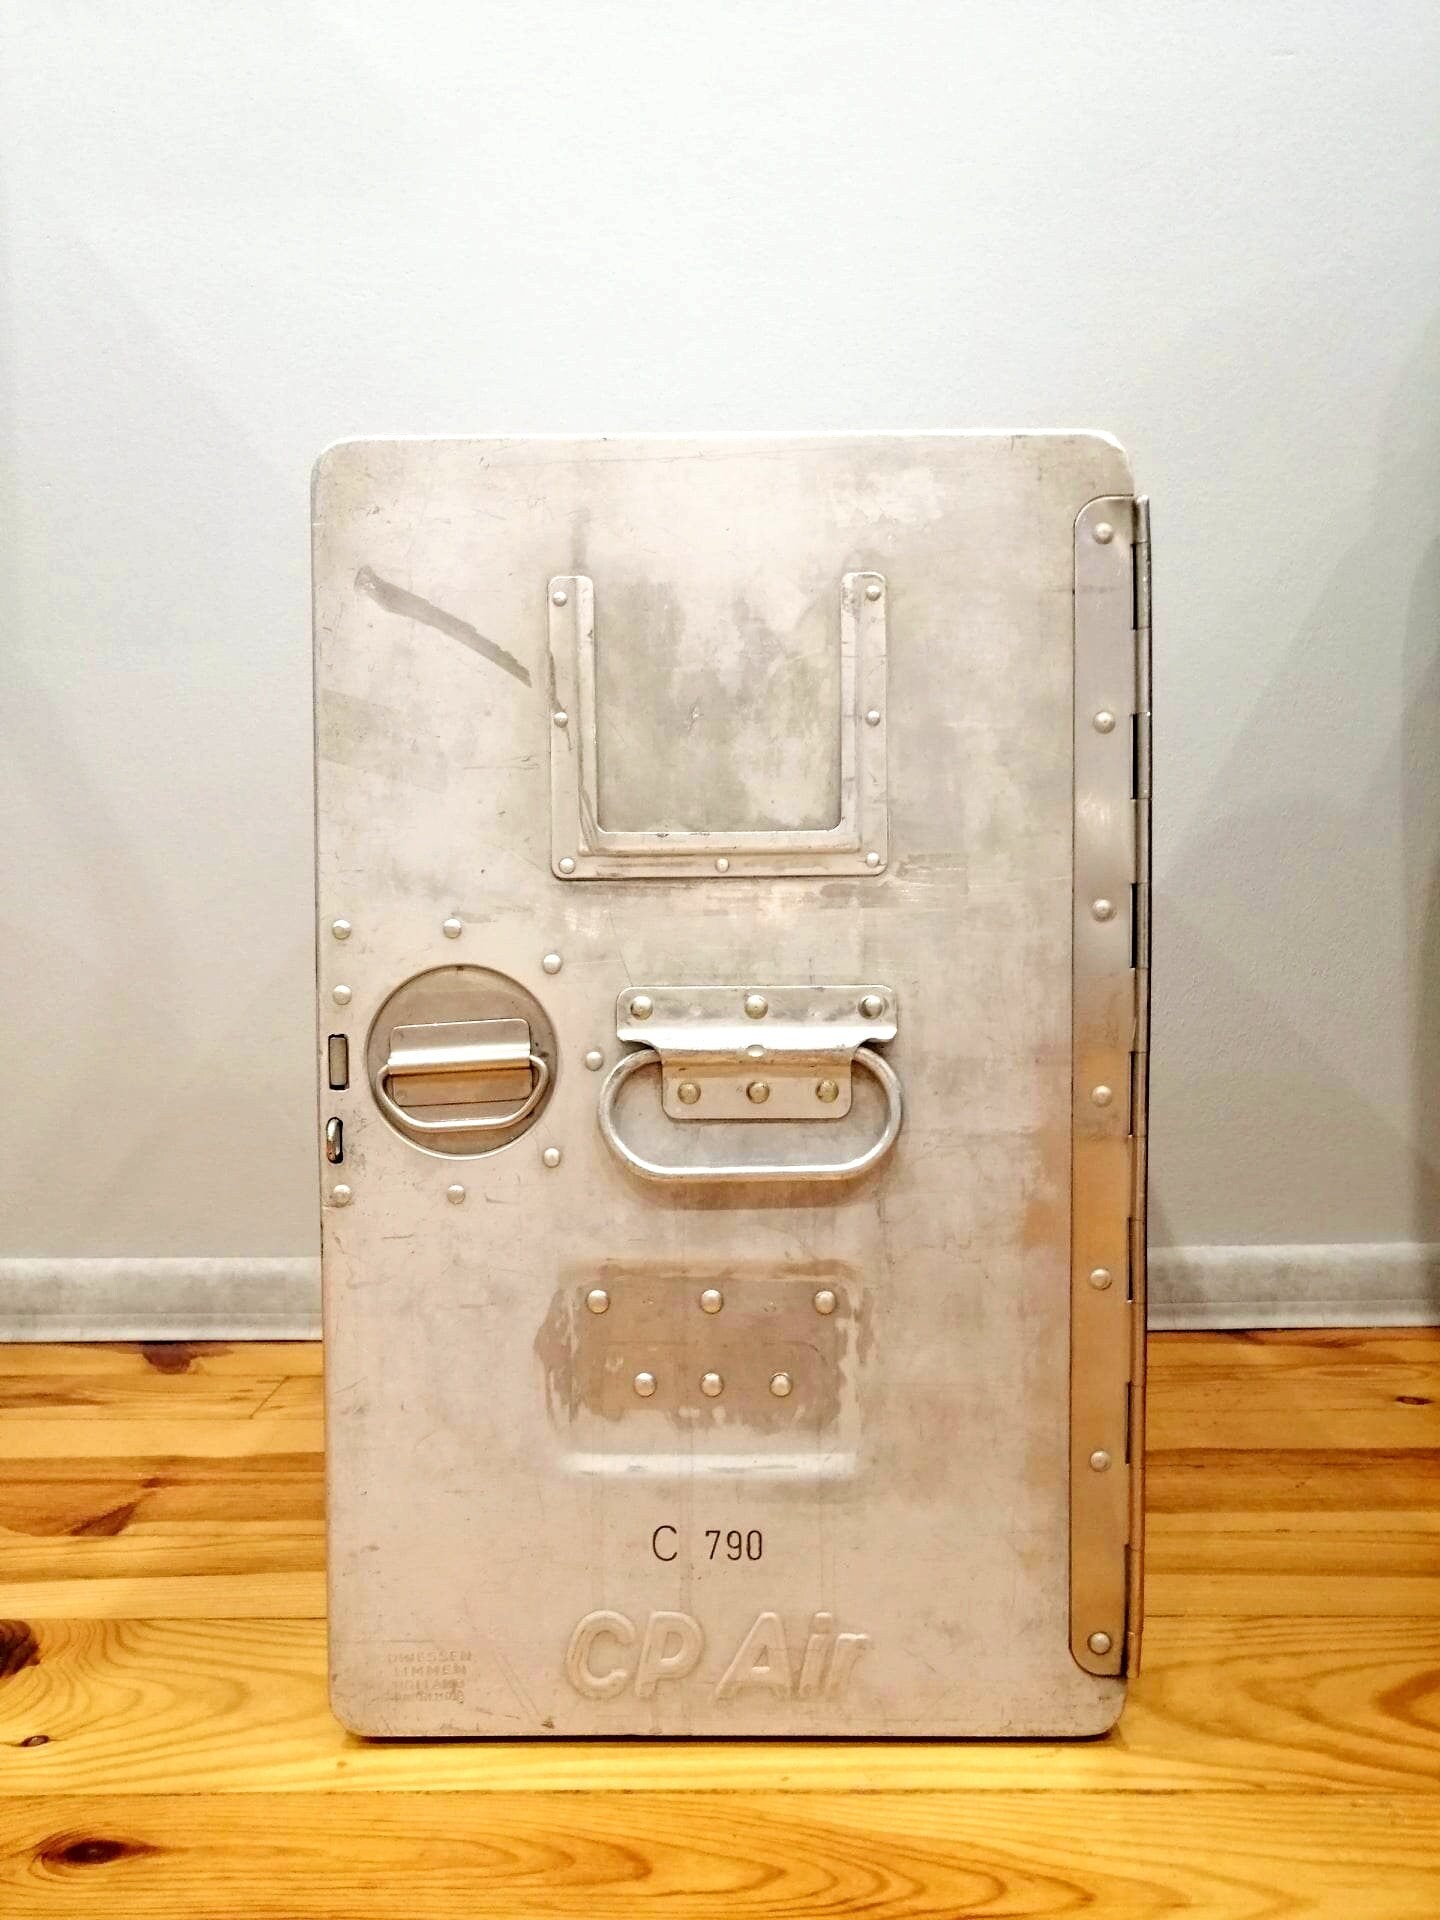 CP Air - Unique Vintage Airline Galley Storage Container, 1970s Driessen Aircraft Storage Box, Canadian Pacific Air Lines